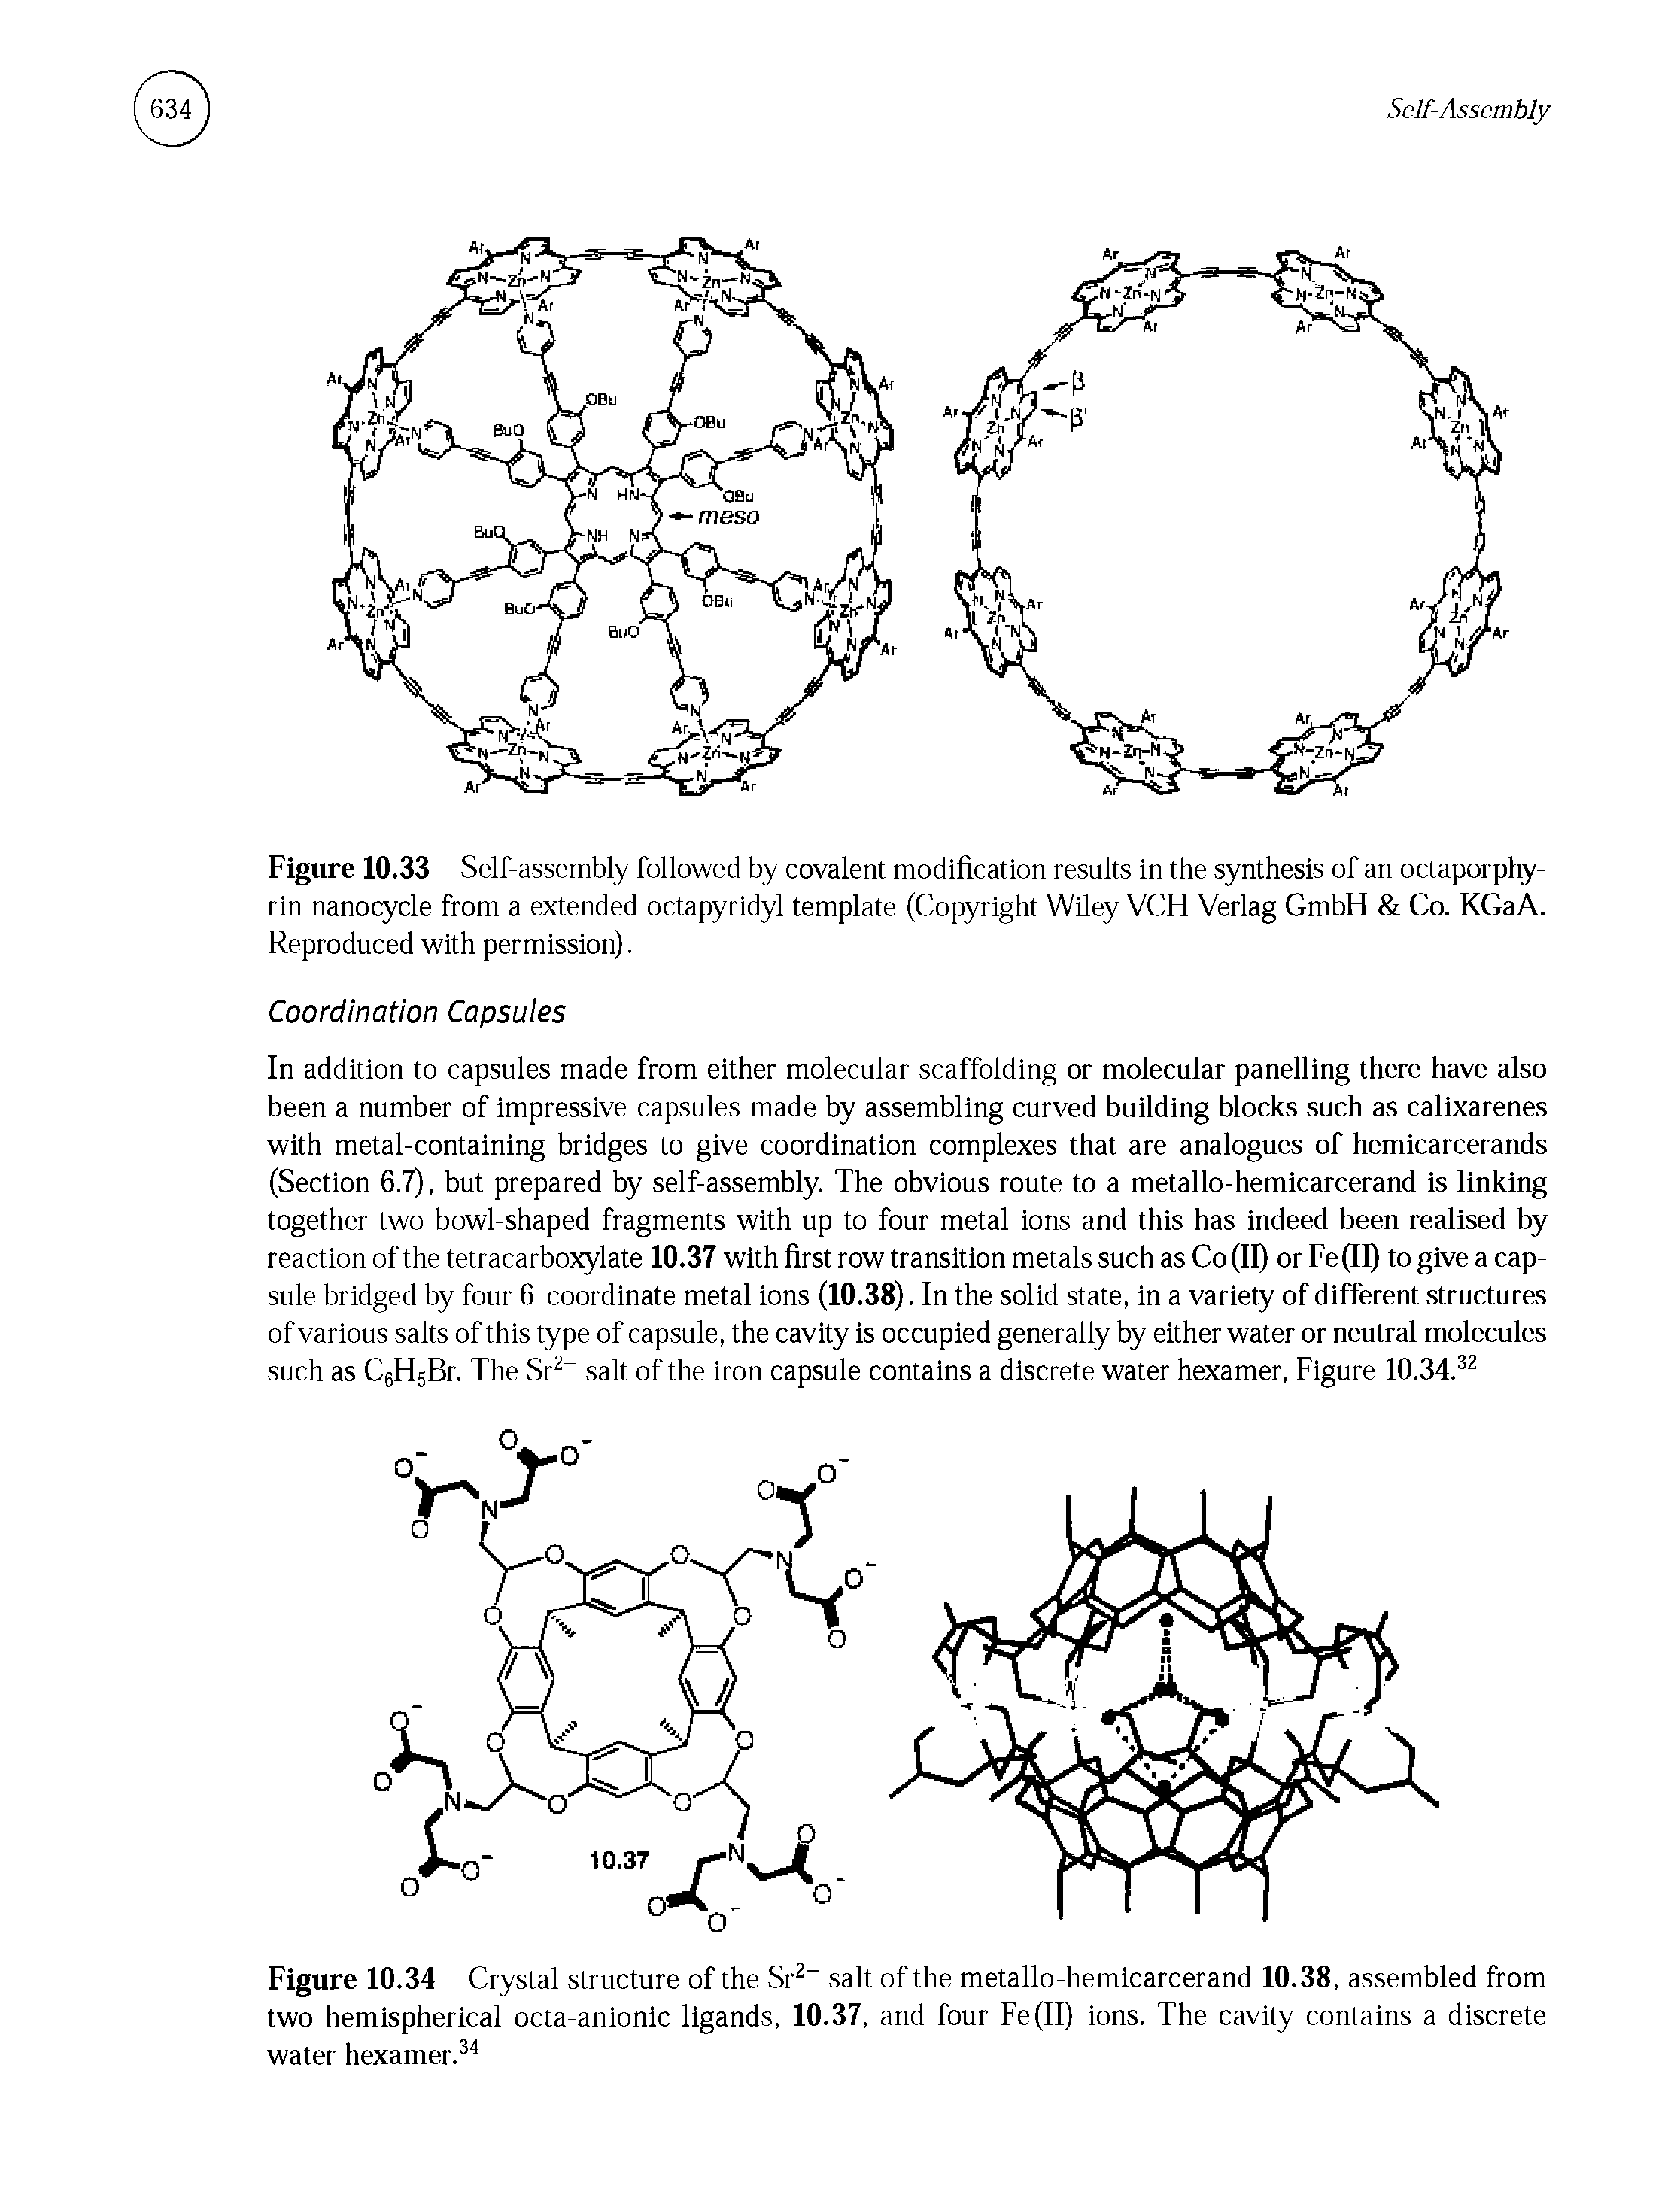 Figure 10.34 Crystal structure of the Sr2+ salt of the metallo-hemicarcerand 10.38, assembled from two hemispherical octa-anionic ligands, 10.37, and four Fe(II) ions. The cavity contains a discrete water hexamer.34...